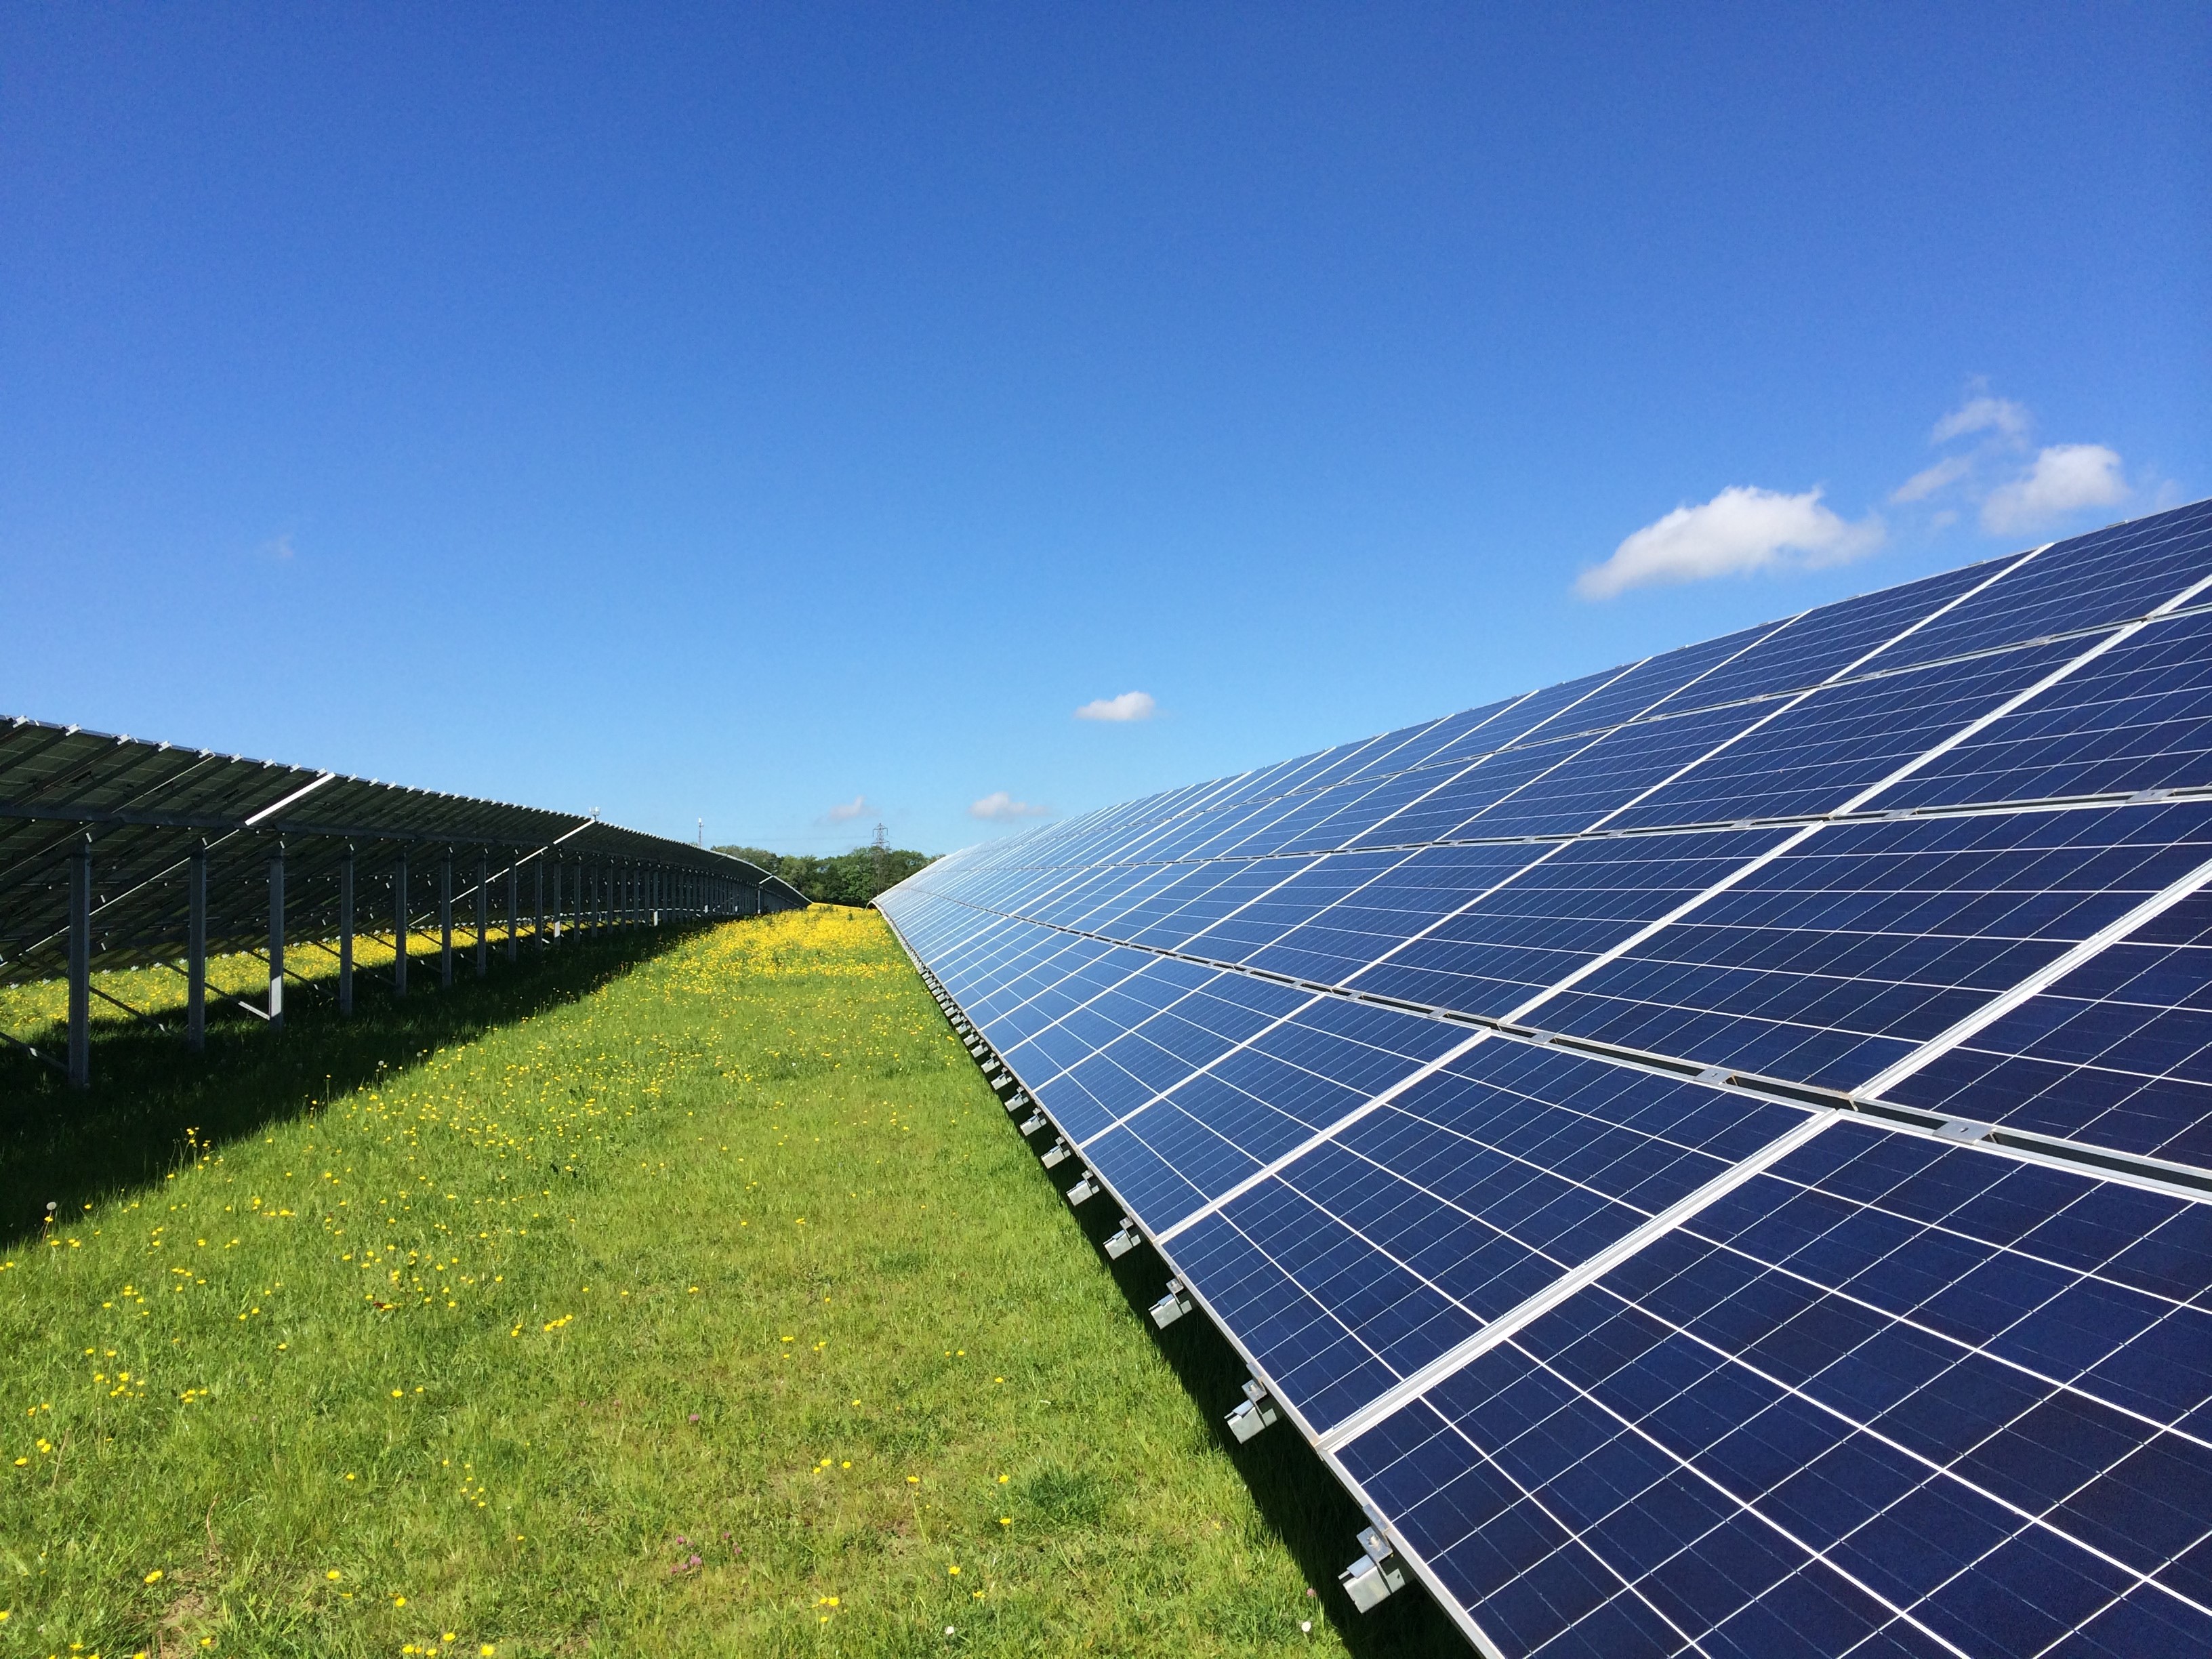 A row of solar panels in a green field, with blue sky above